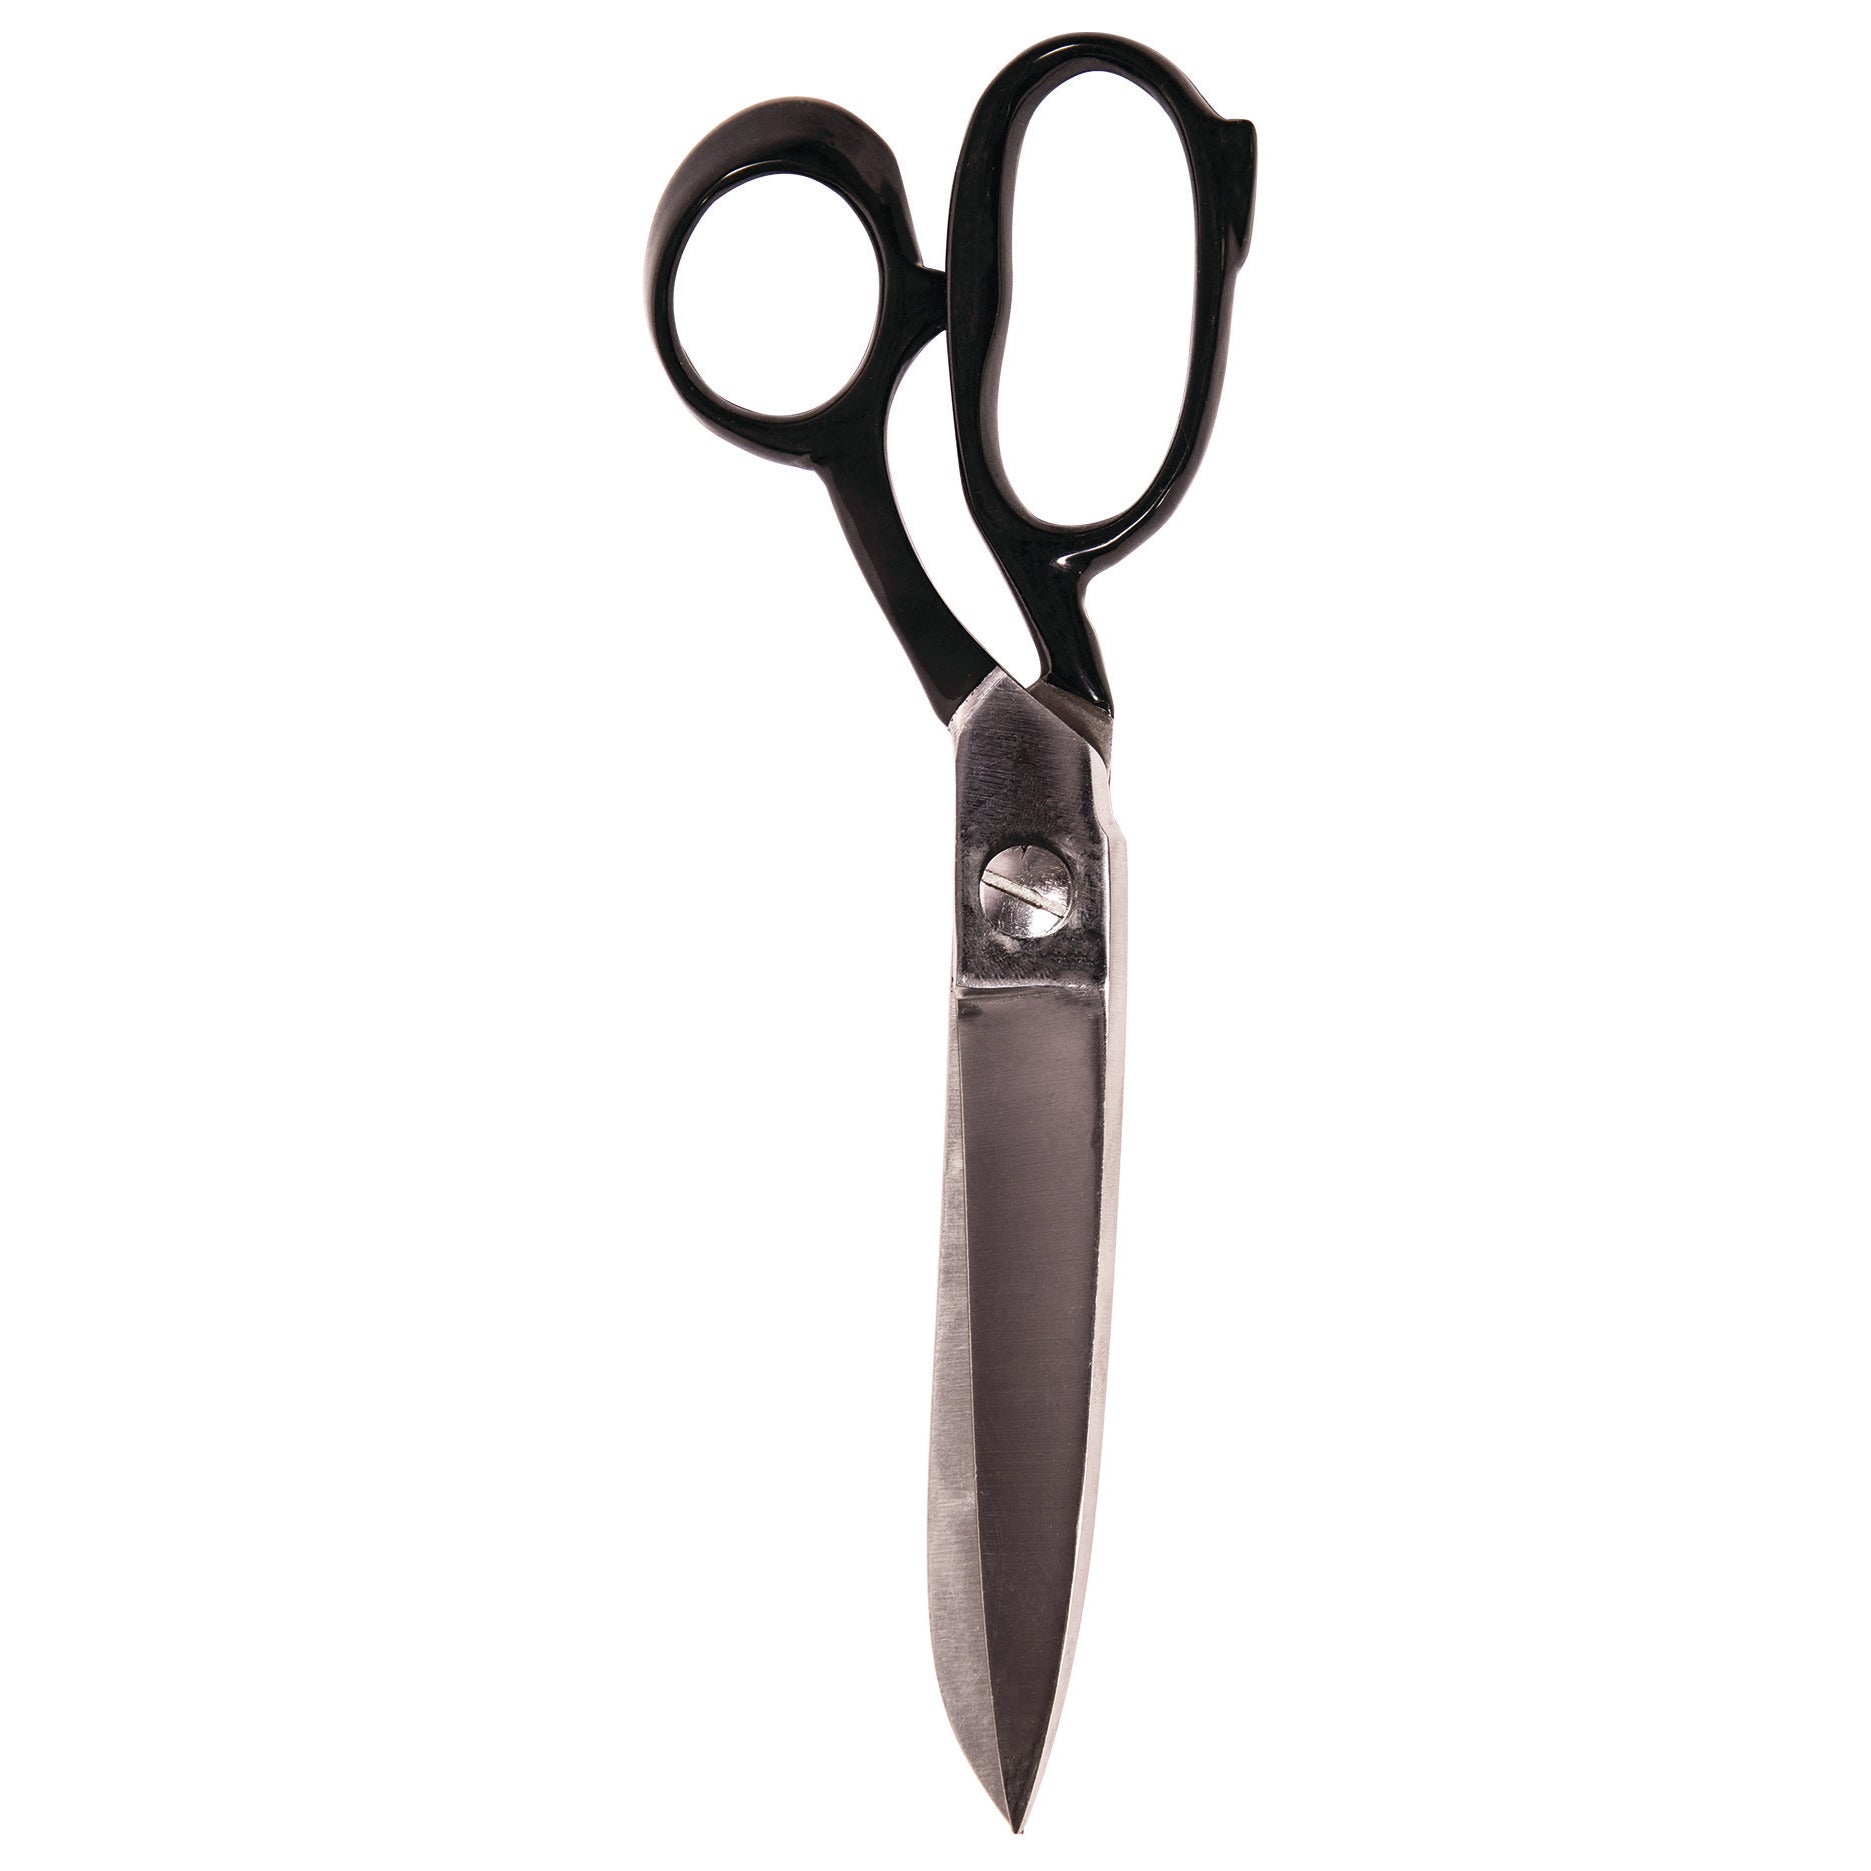 EARLY YEARS & SCHOOL SCISSORS, Crazy Cutters, Pack of 6